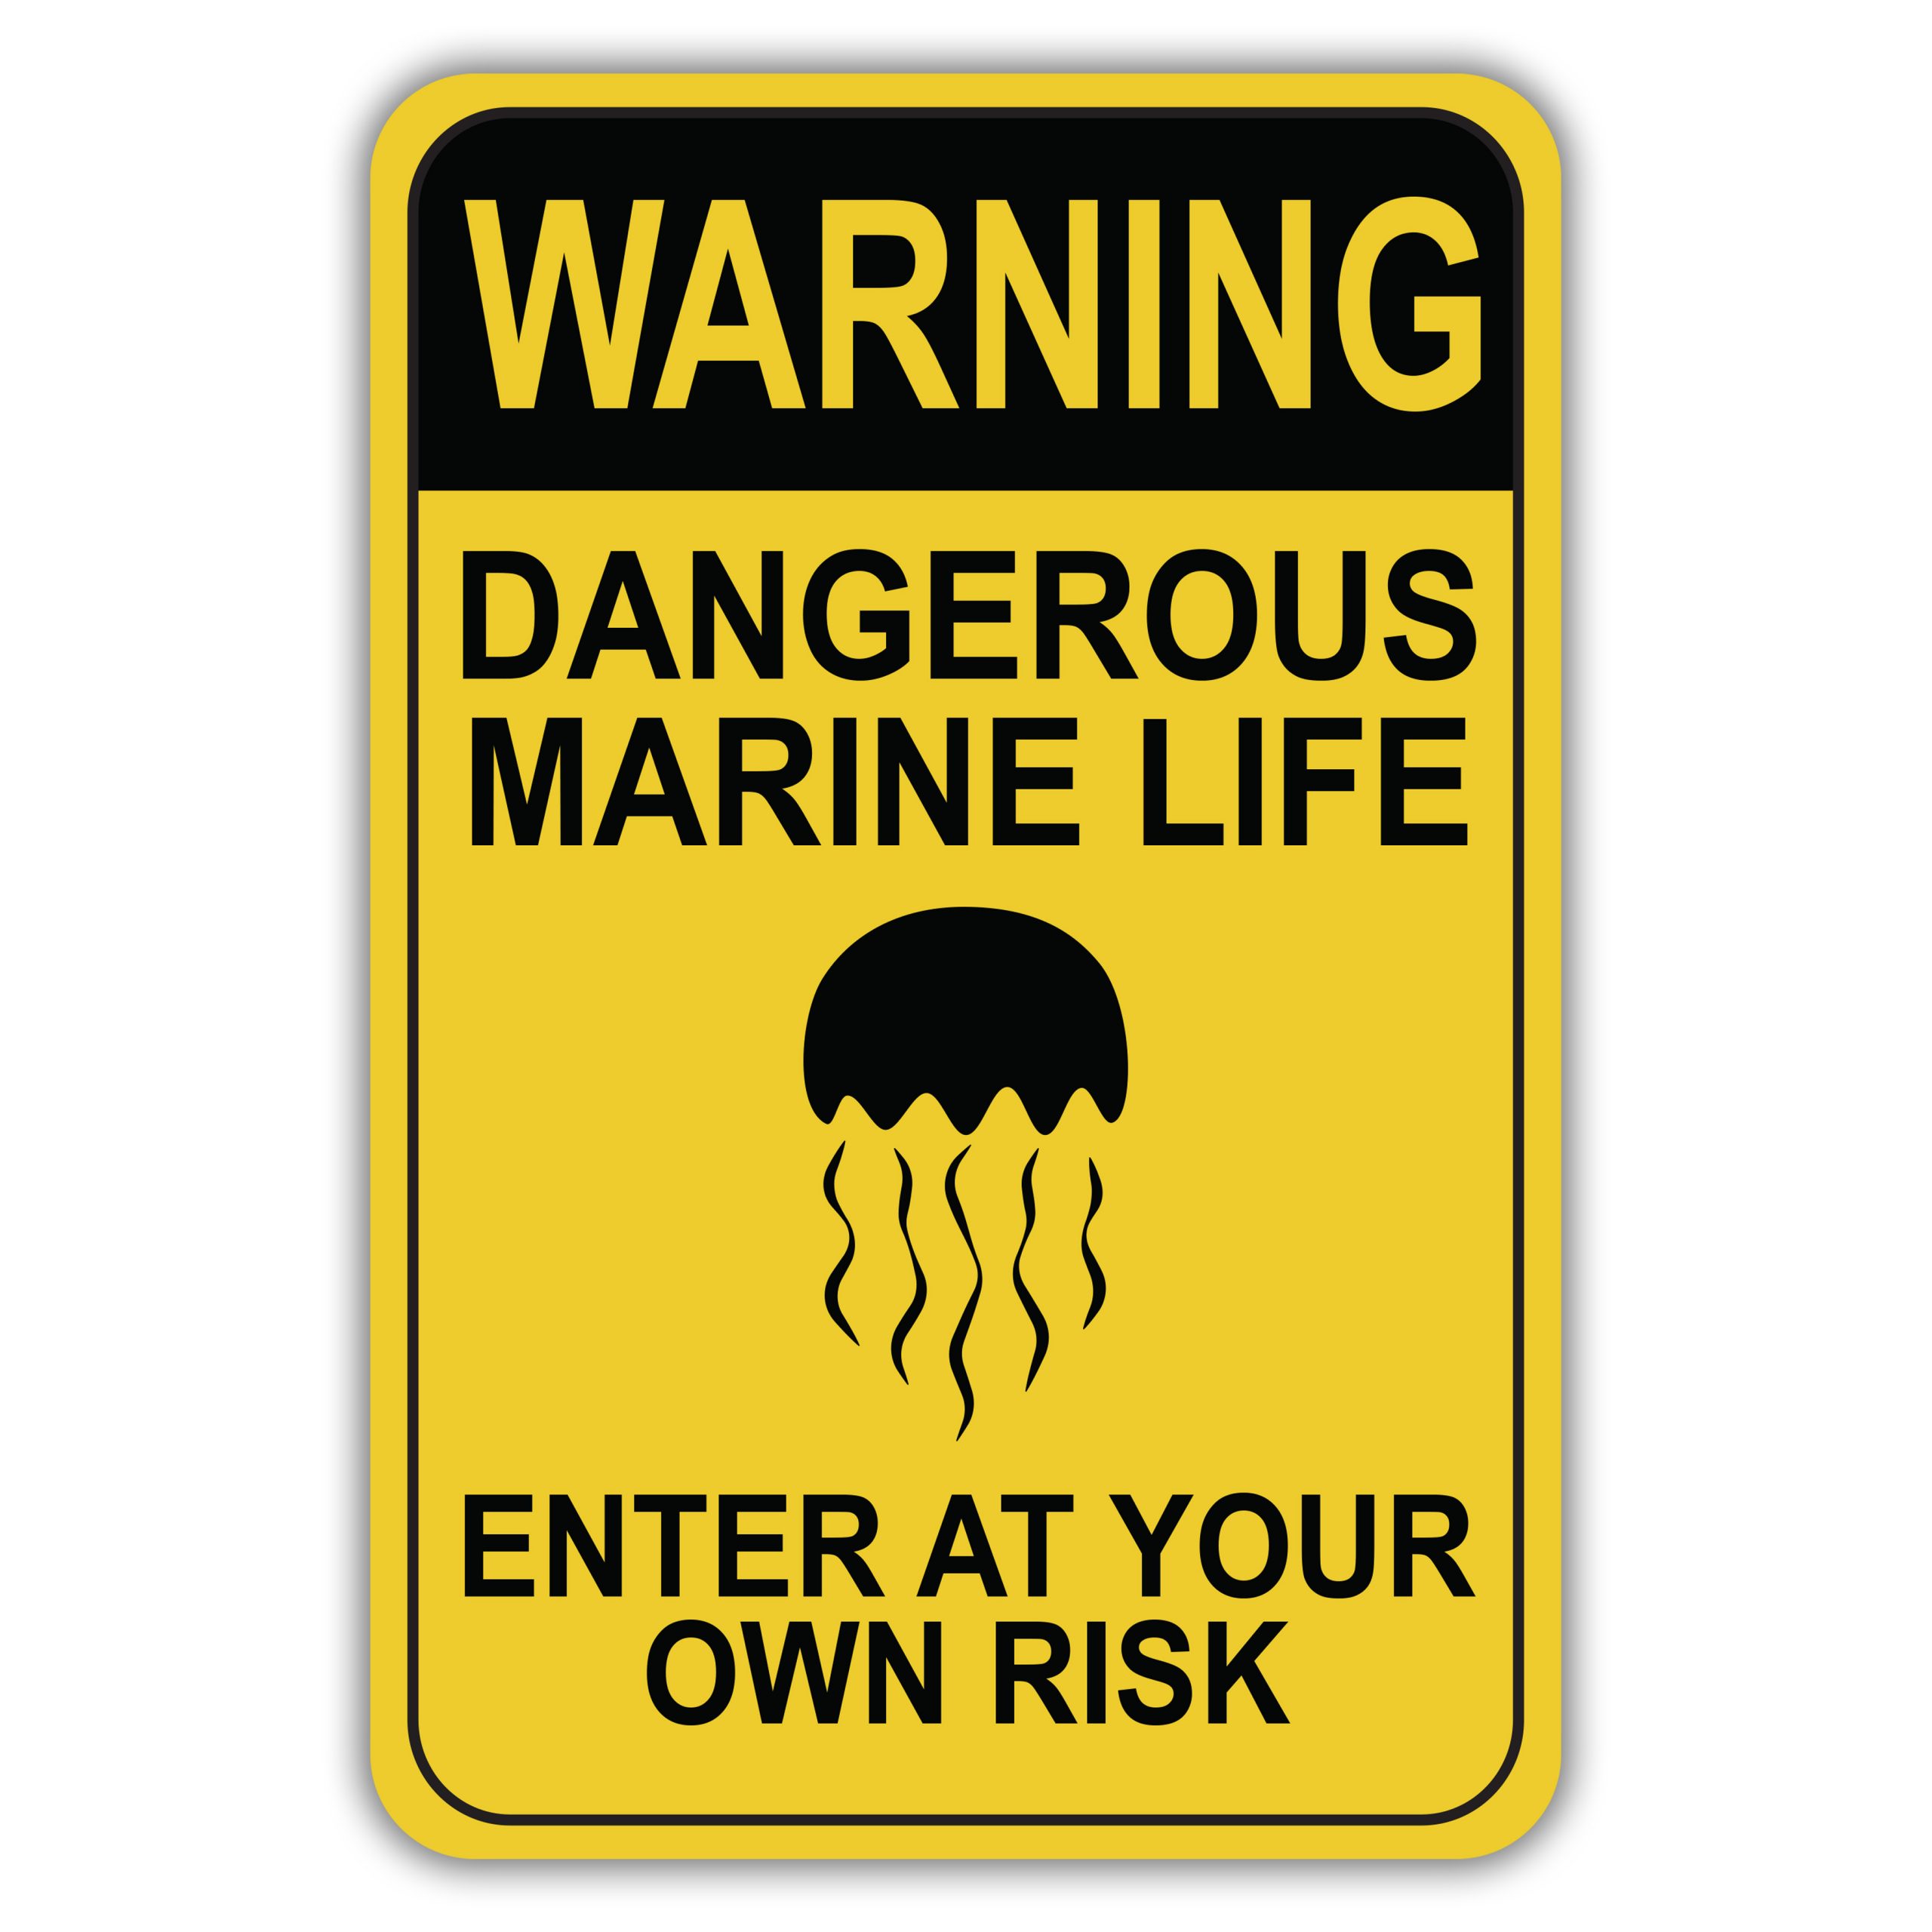 warning-dangerous-marine-life-enter-at-your-own-risk-american-sign